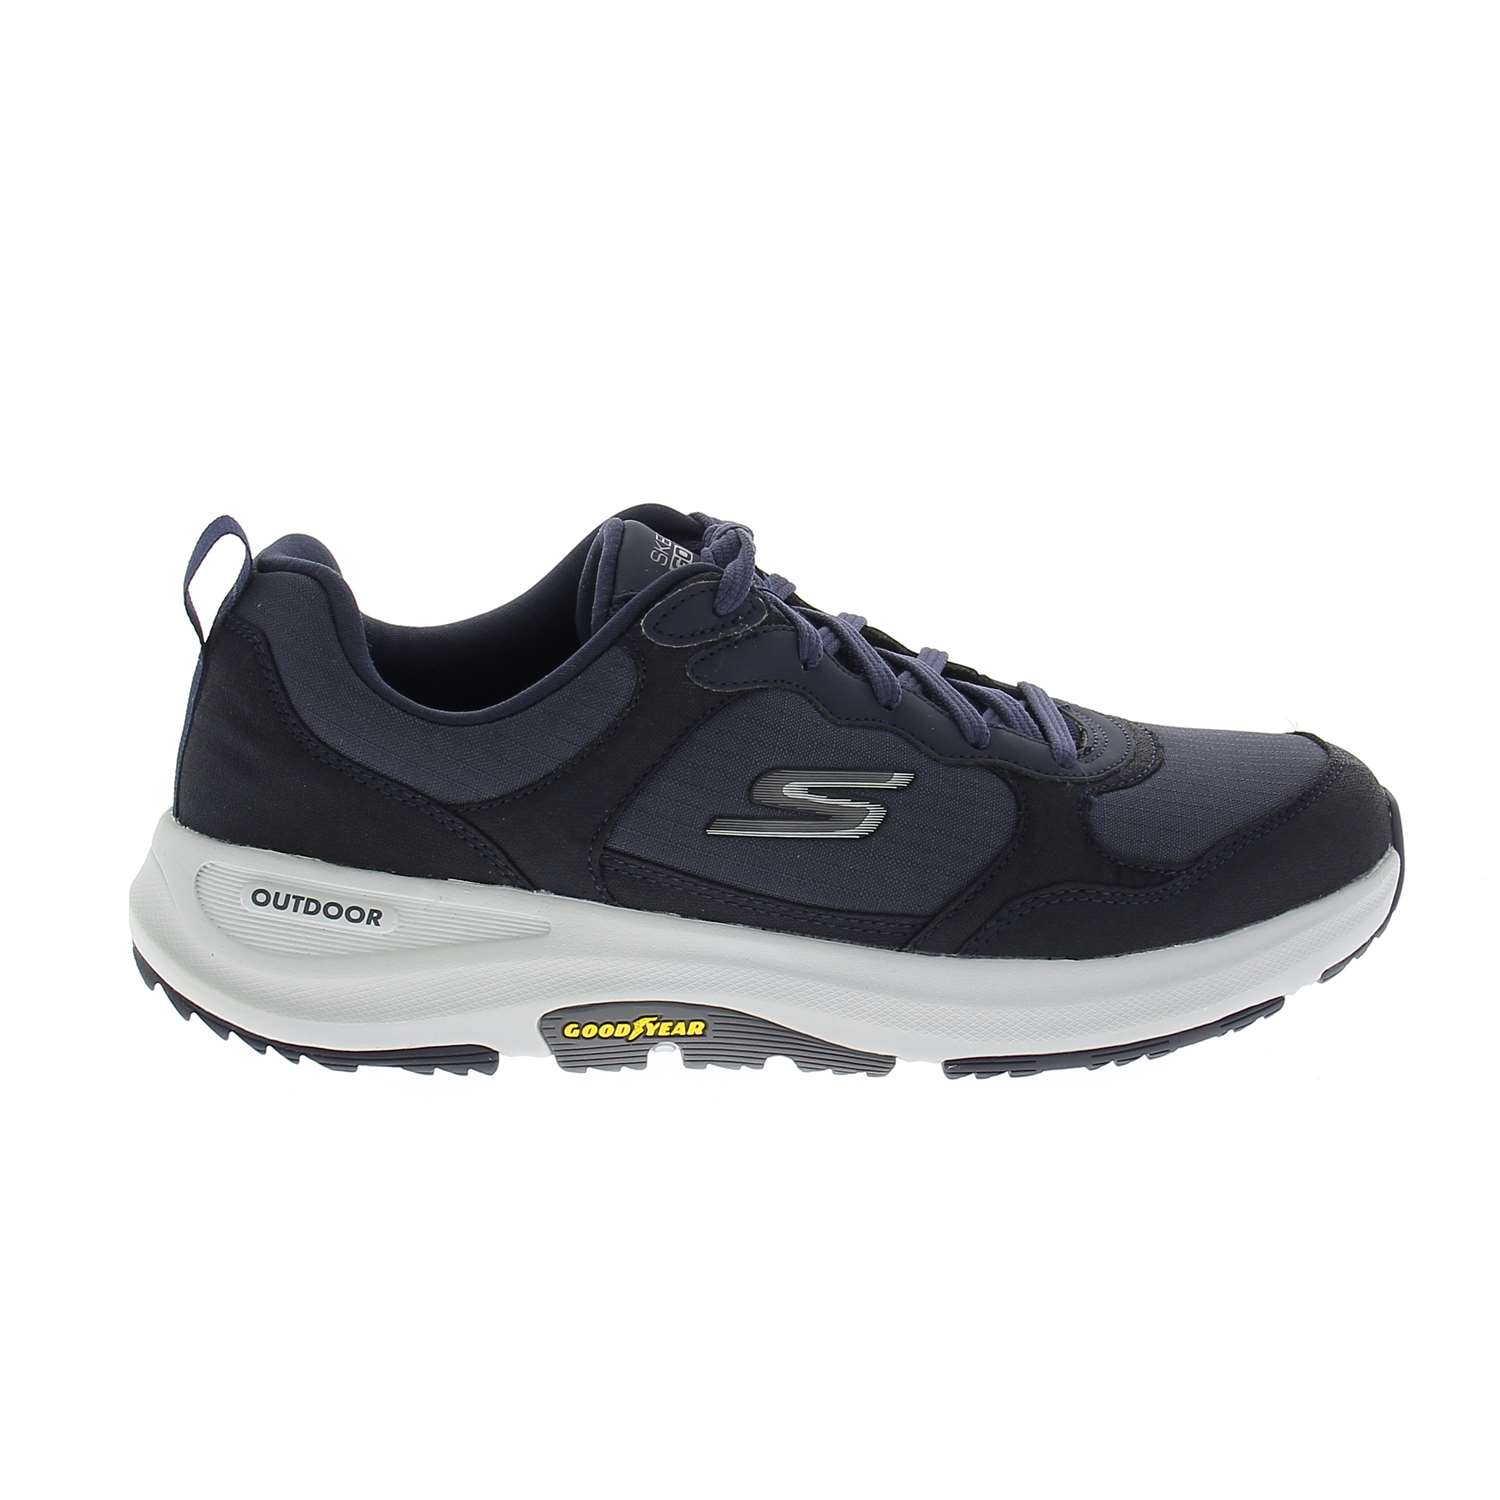 02 - GO WALK OUTDOOR - SKECHERS - Chaussures à lacets - Synthétique